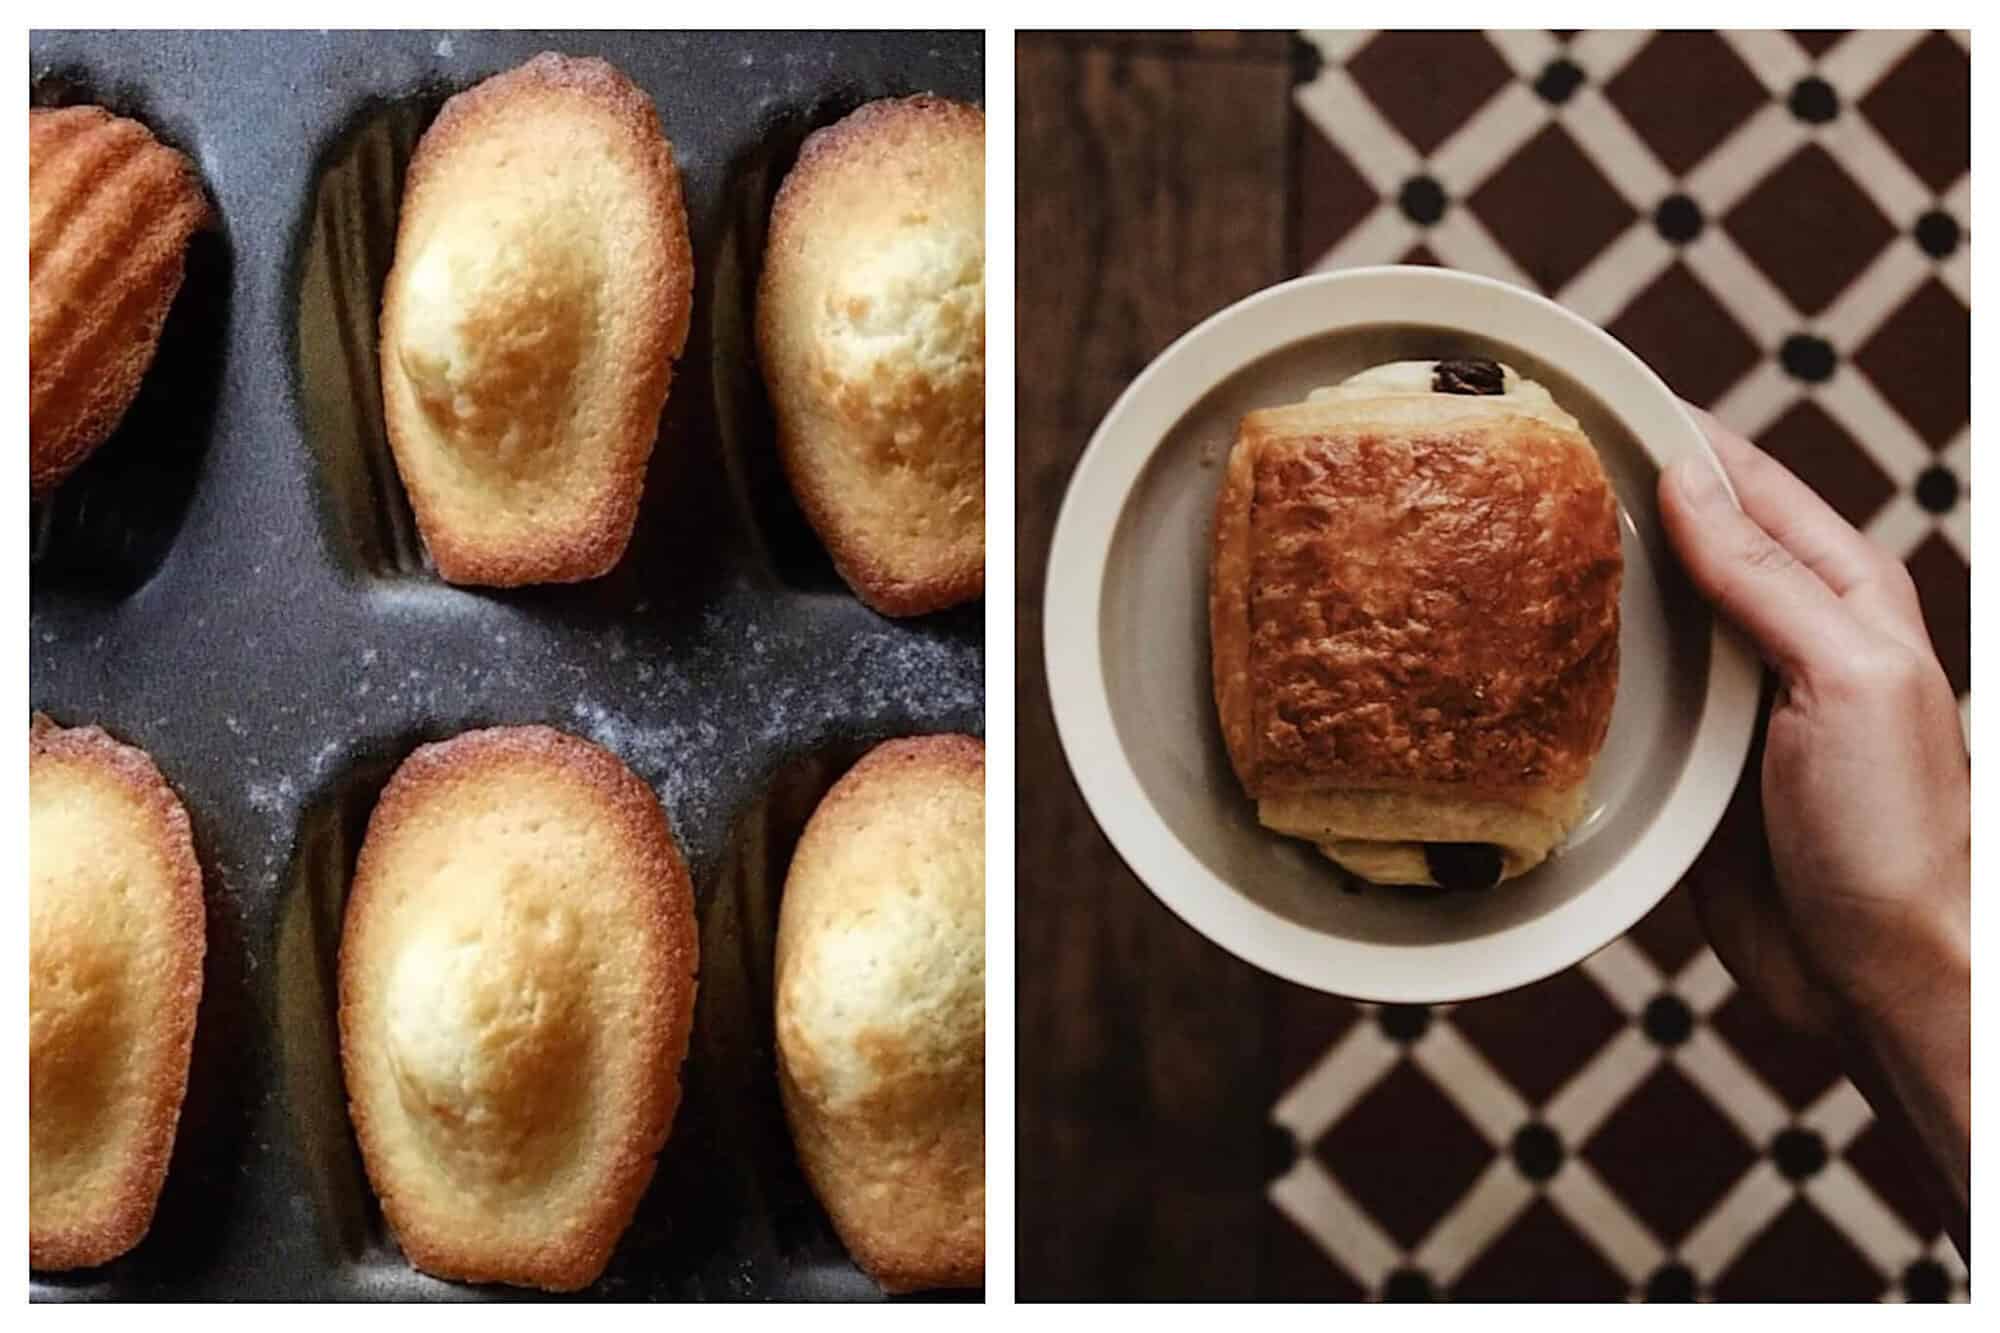 Left: Freshly baked Madeleines, light on the top and golden brown on the bottom, sit in the Madeleine cooking dish they were just baked in, Right: A person holds a small plate, atop of which is a large pain au chocolat.